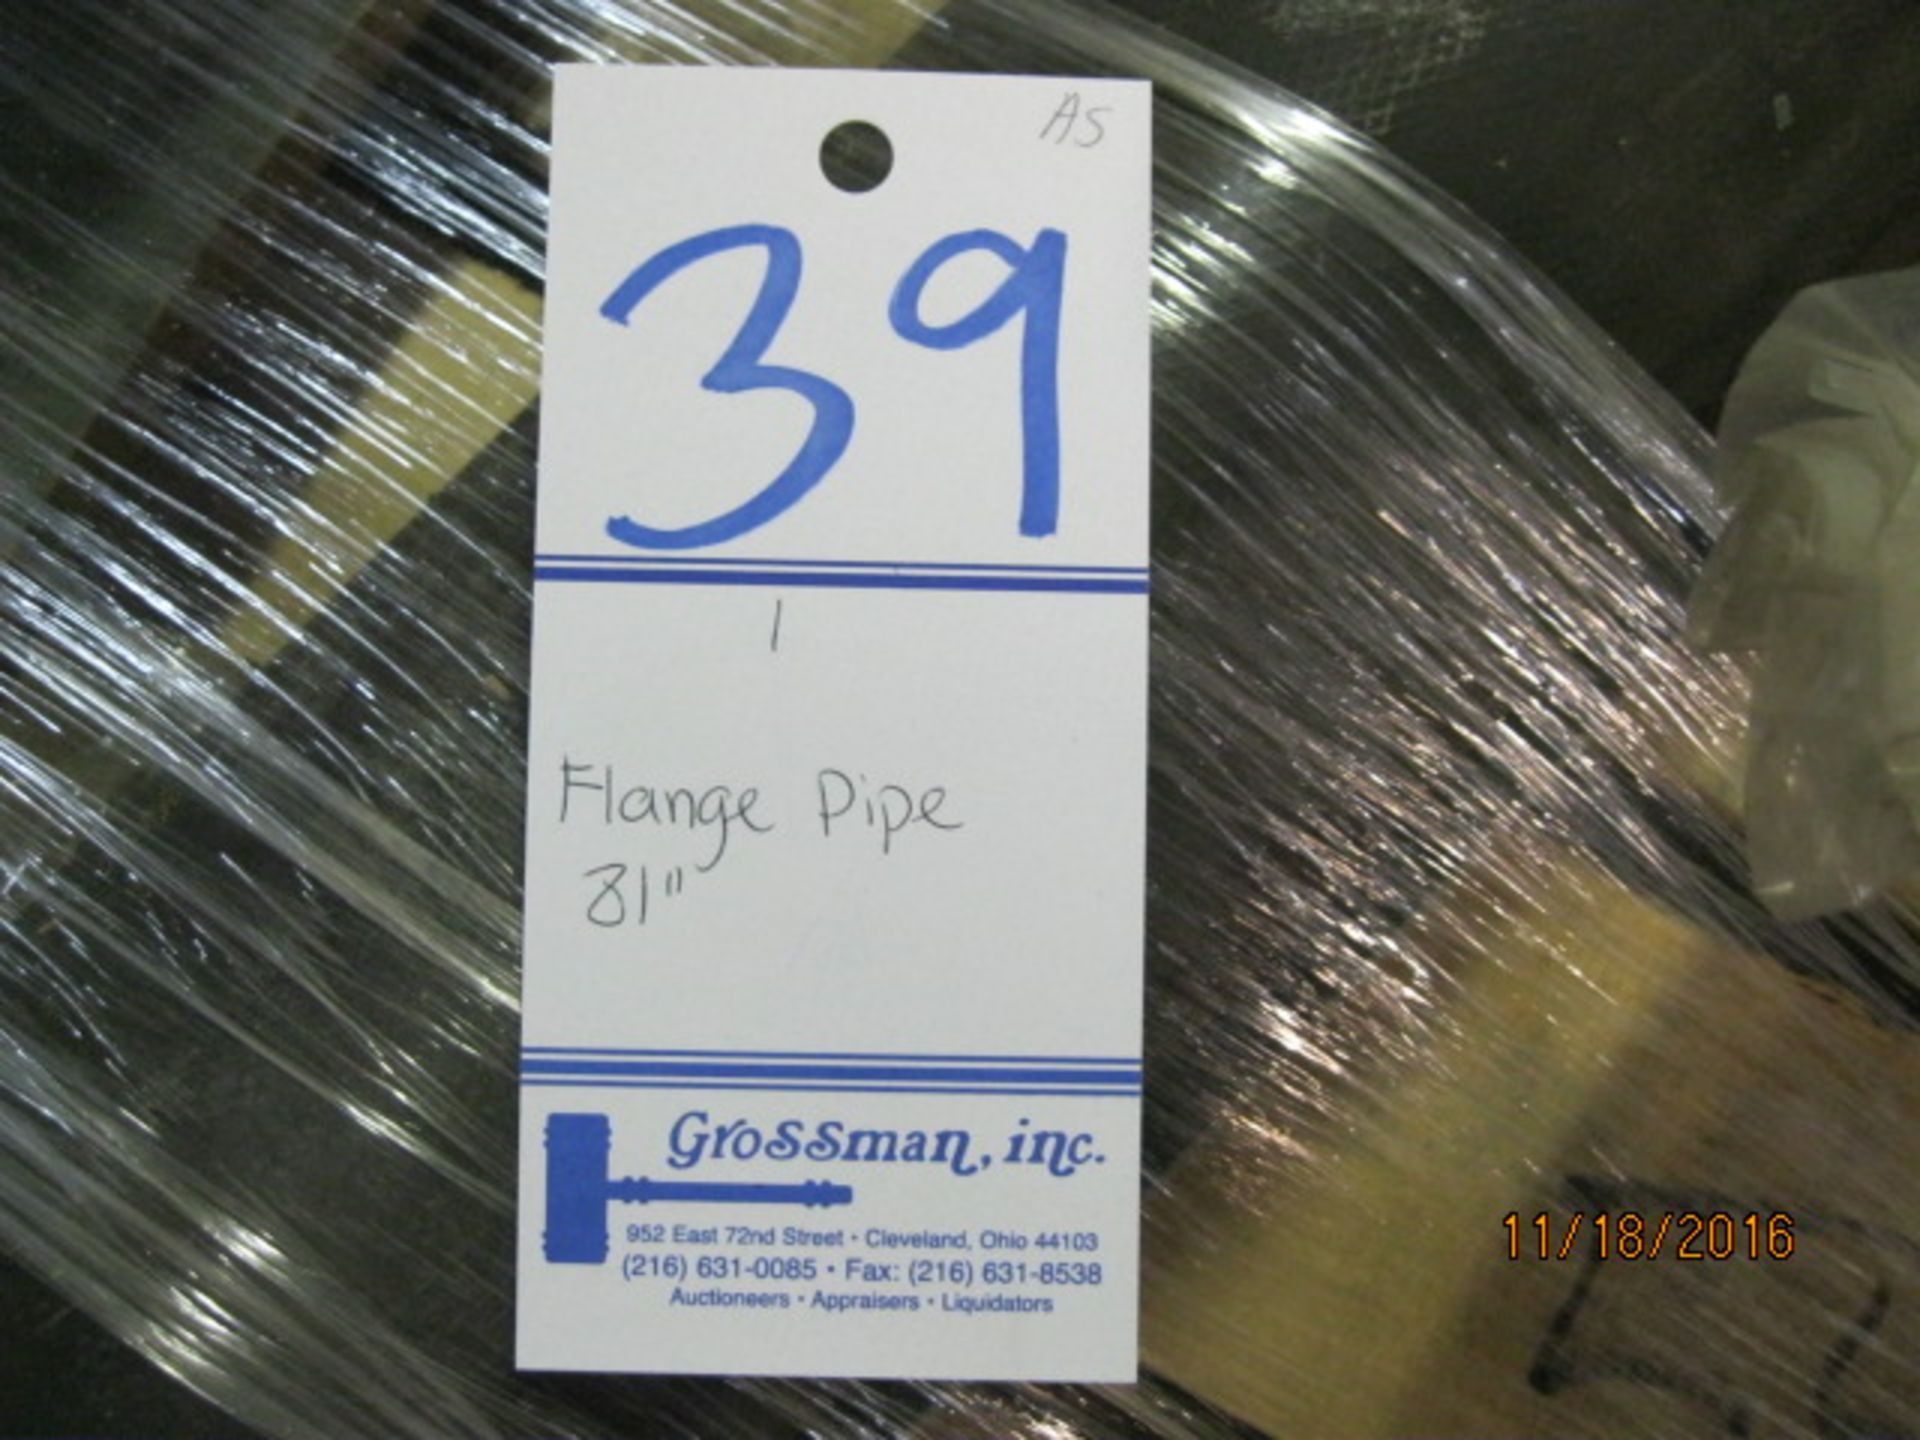 Flange pipe 81" - Image 4 of 4